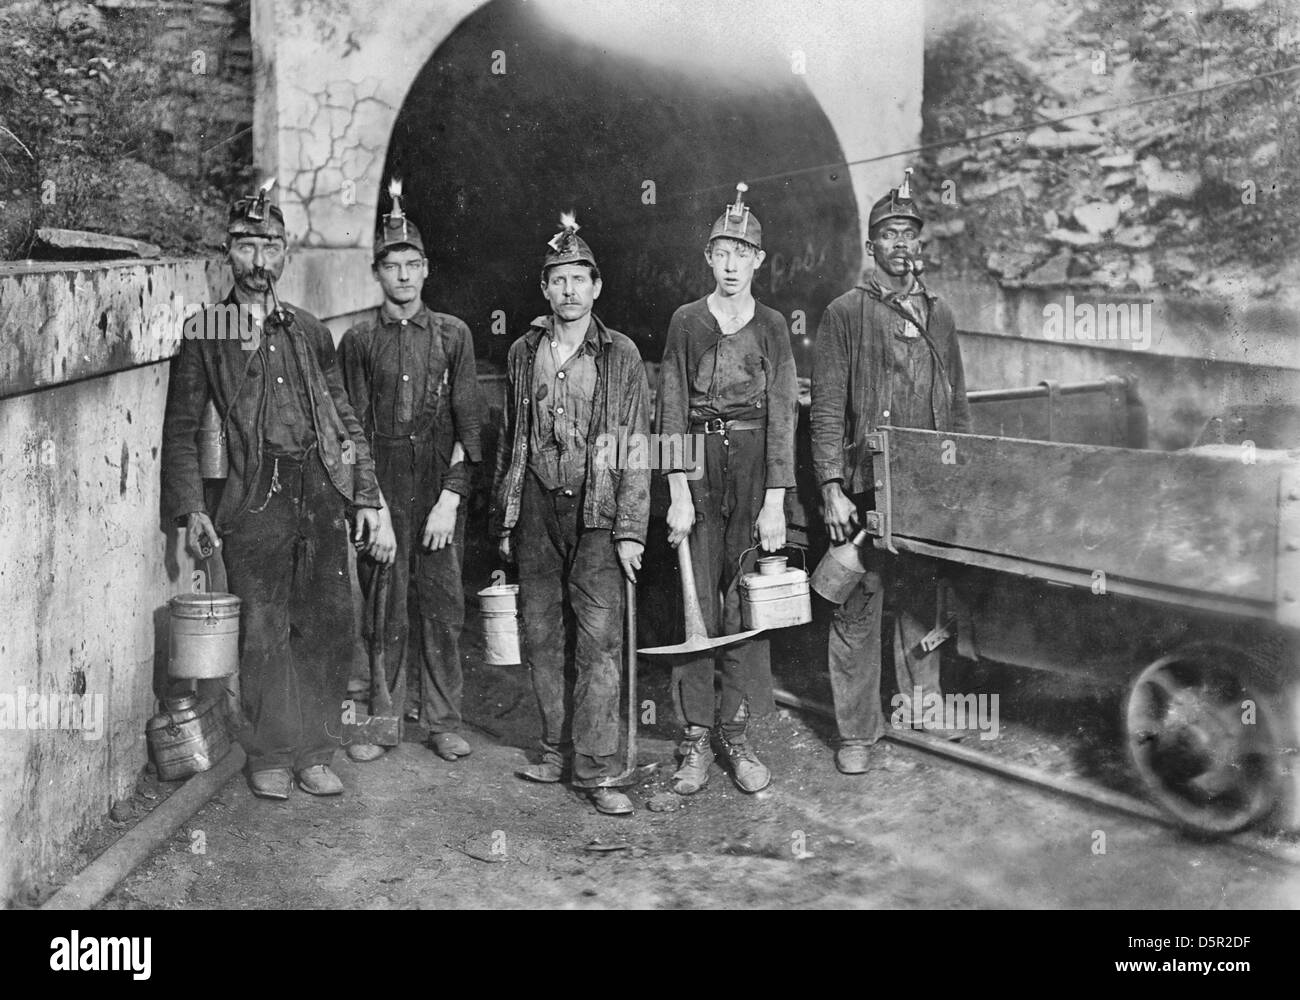 Main entrance, Gary West Virginia Mine. Trapper boy in center. Going to work 7 A.M. will be underground until 5:30 P.M. Trappers are paid $1. per day. Location: Gary, West Virginia, circa 1908 Stock Photo